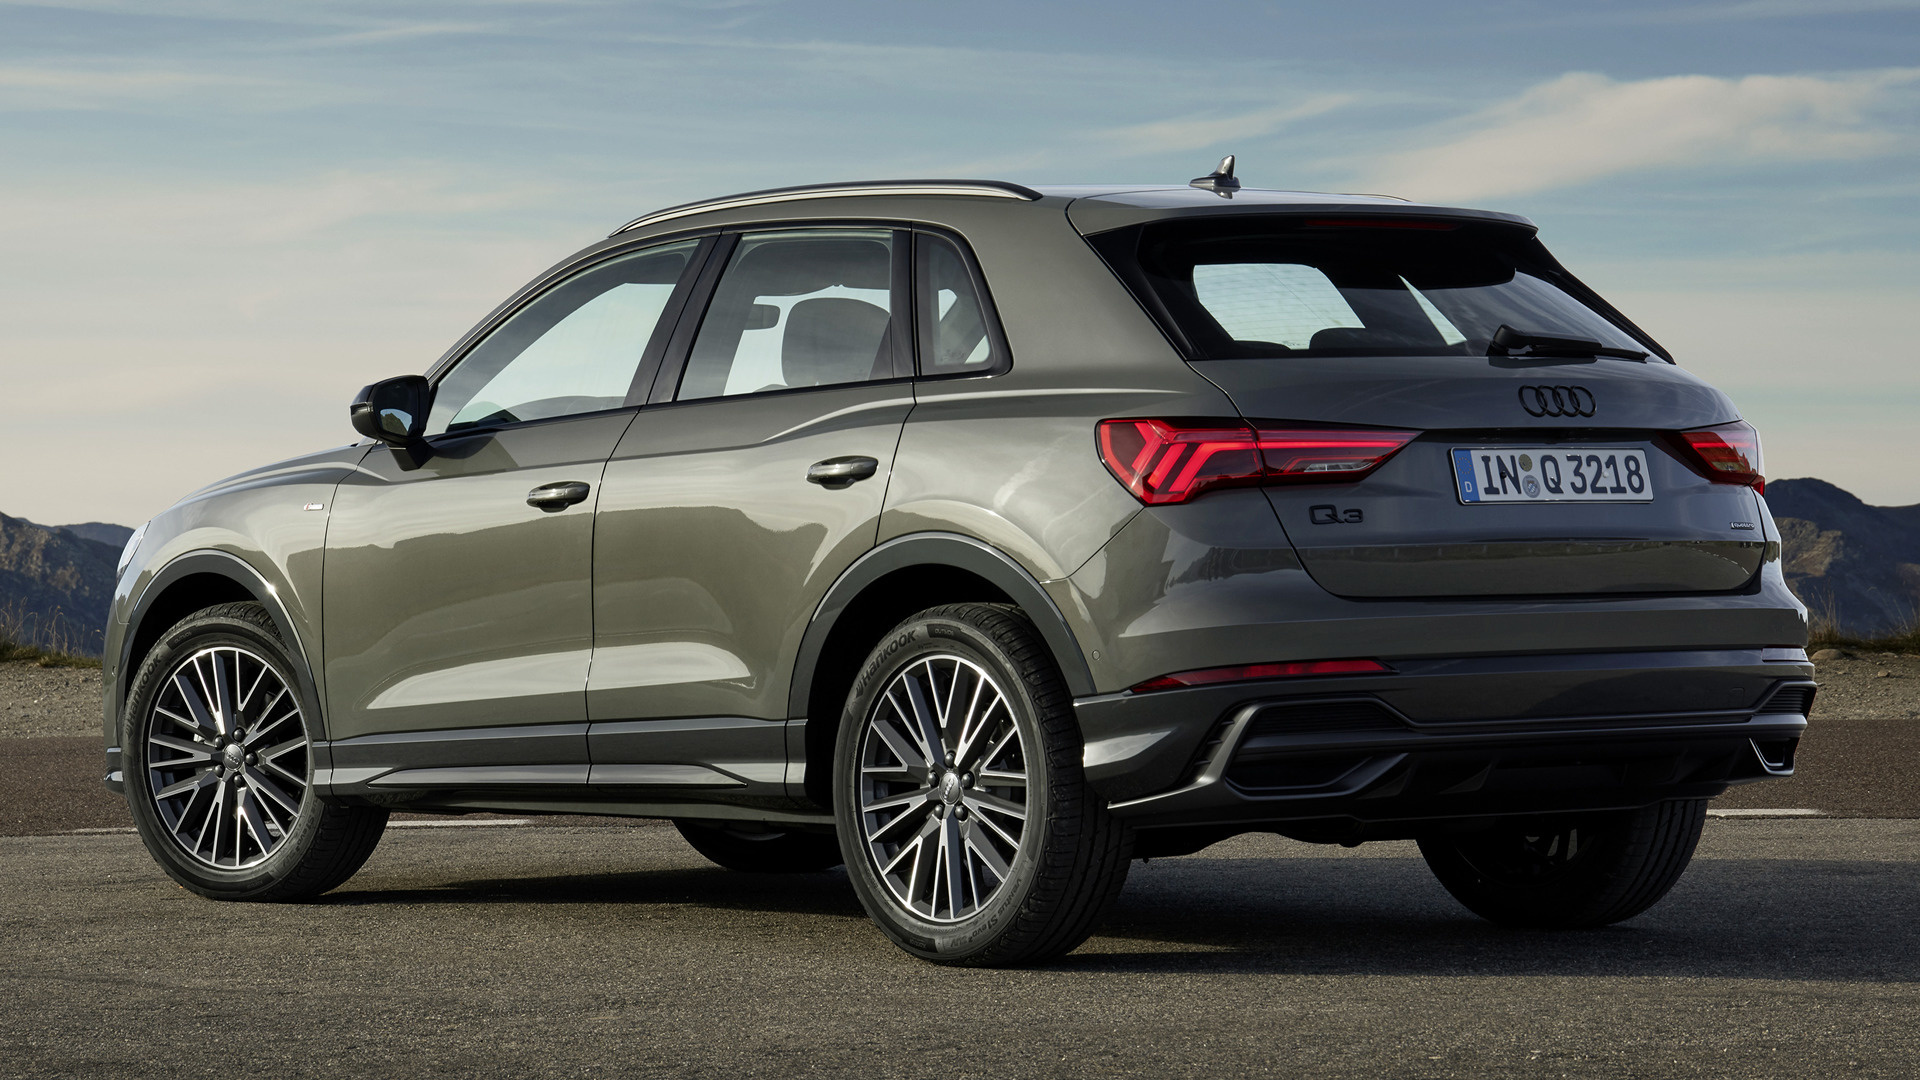 Audi Q3, 2018 edition one, Wallpapers, HD images, 1920x1080 Full HD Desktop